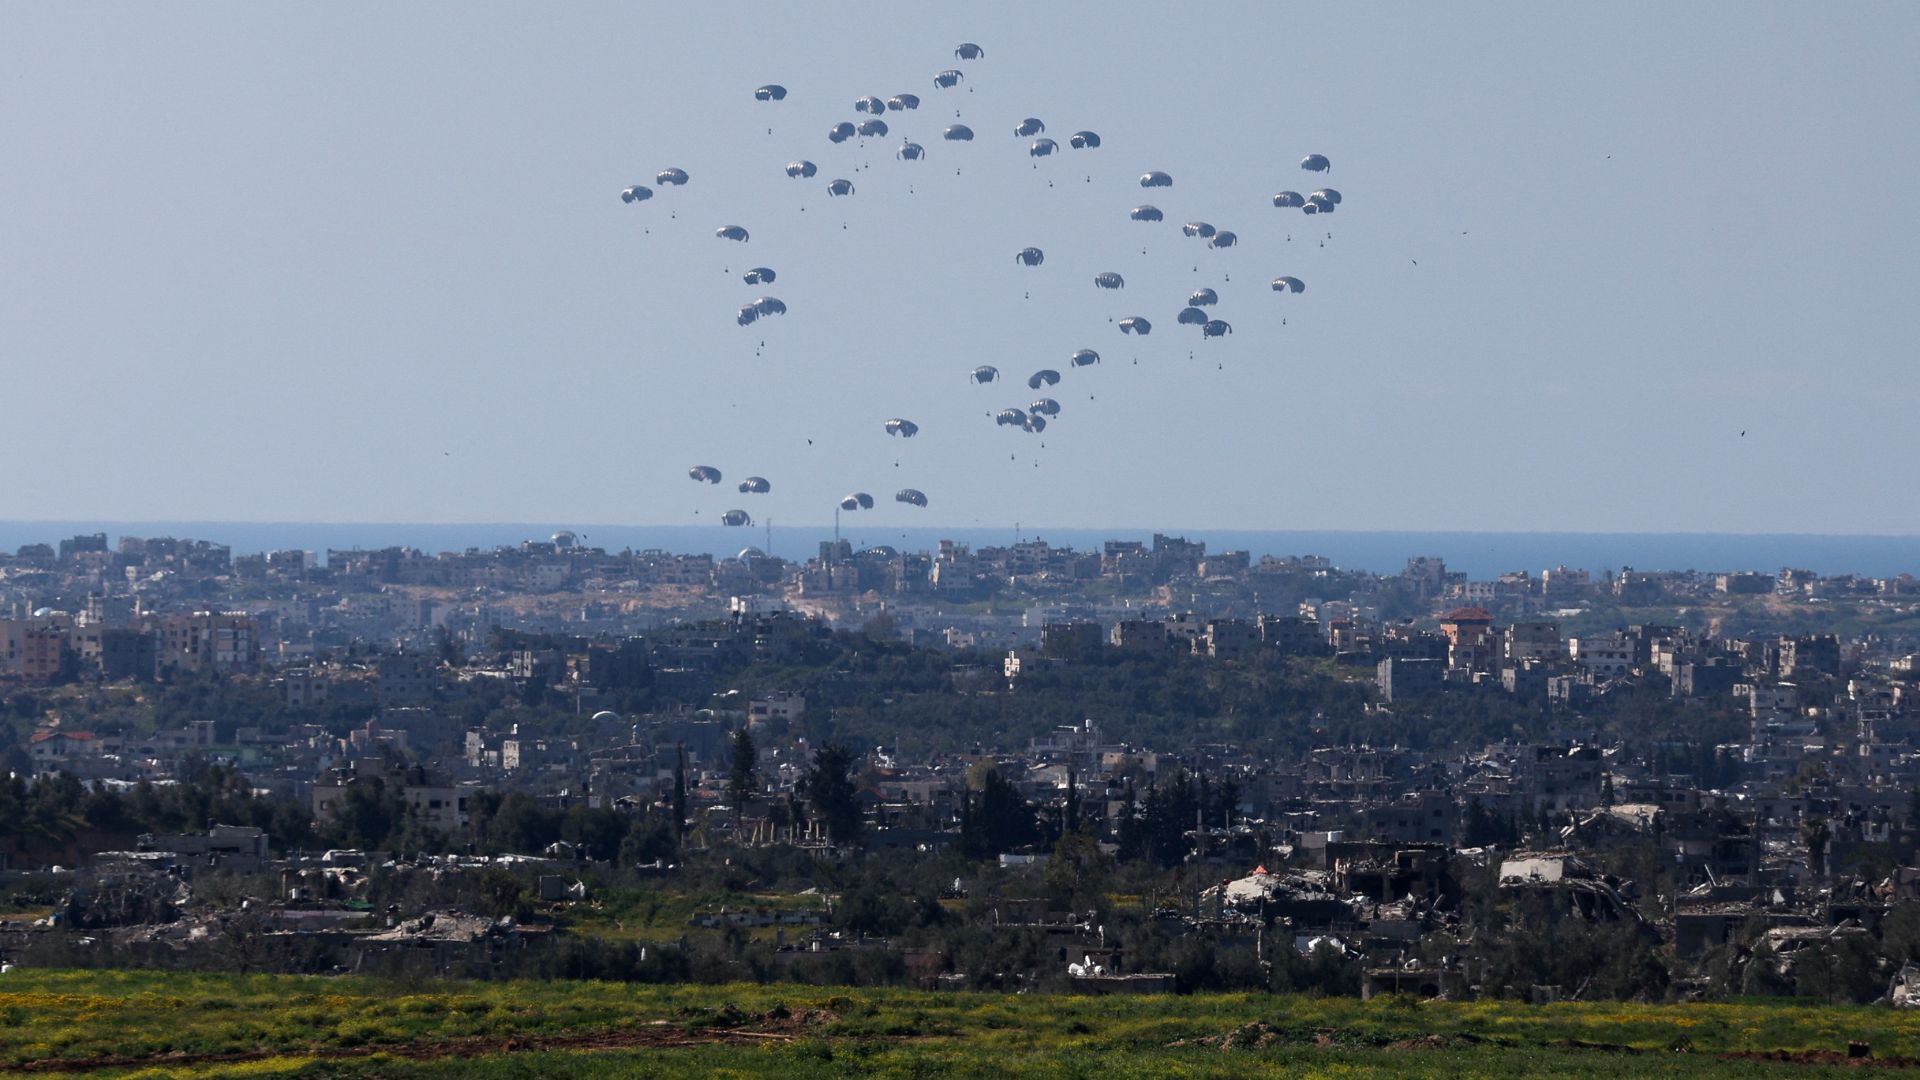 Packages fall towards northern Gaza, after being dropped from a military aircraft. /Ronen Zvulun/Reuters
